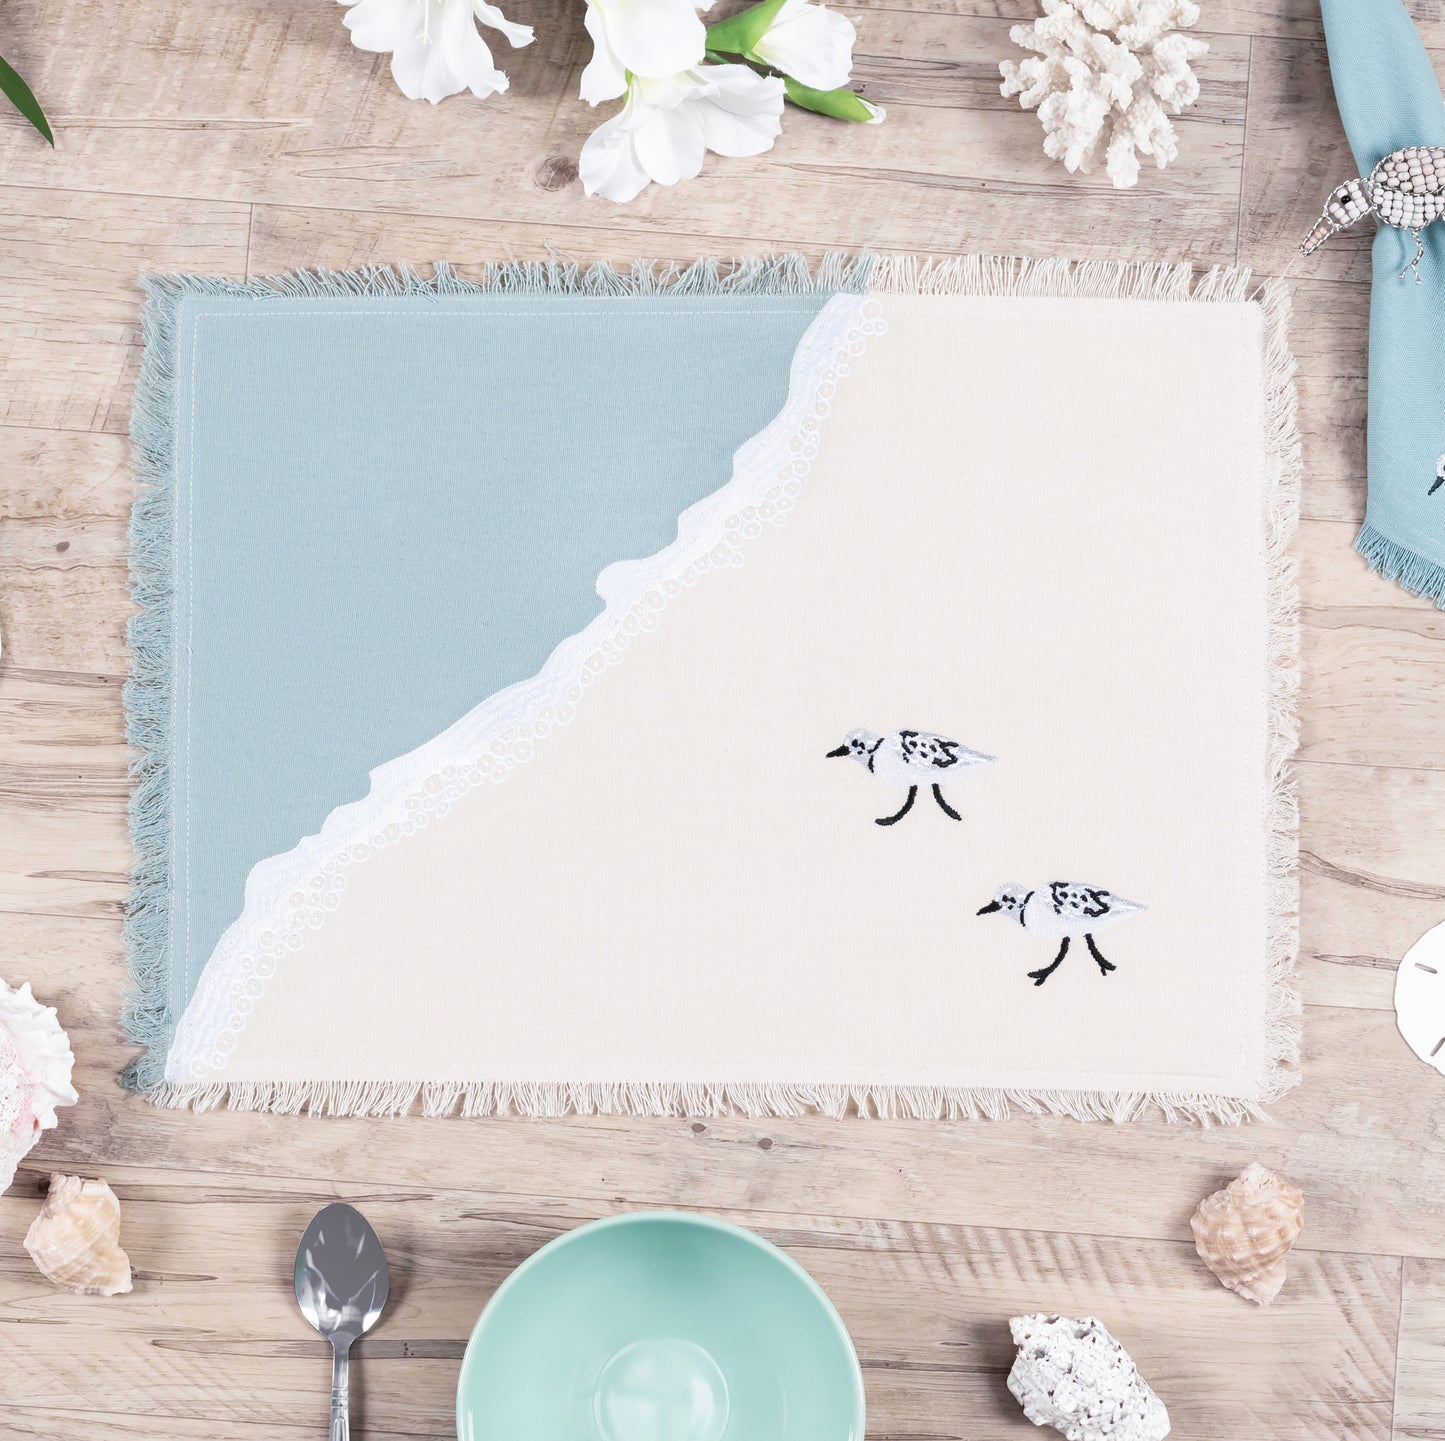 Two sandpipers embroidered on a cotton fringed placemat featuring blue waves on sand. Placemat is sitting on a wooden table.